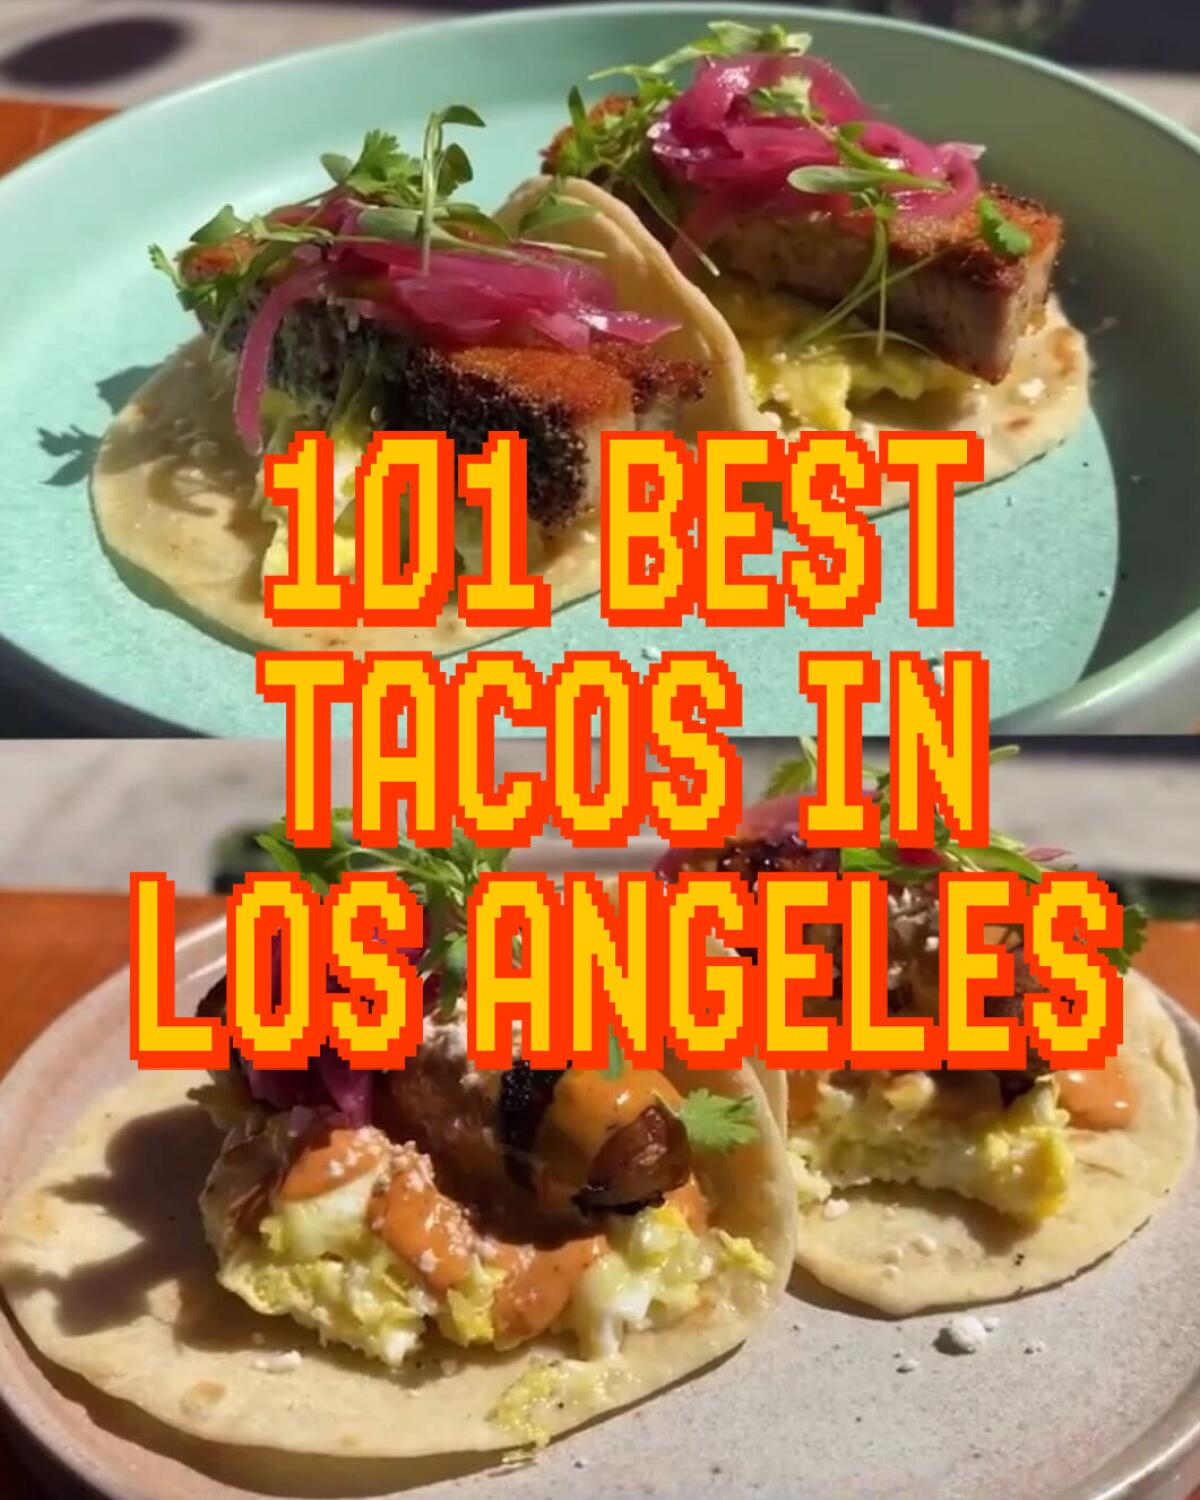 Best tacos guide